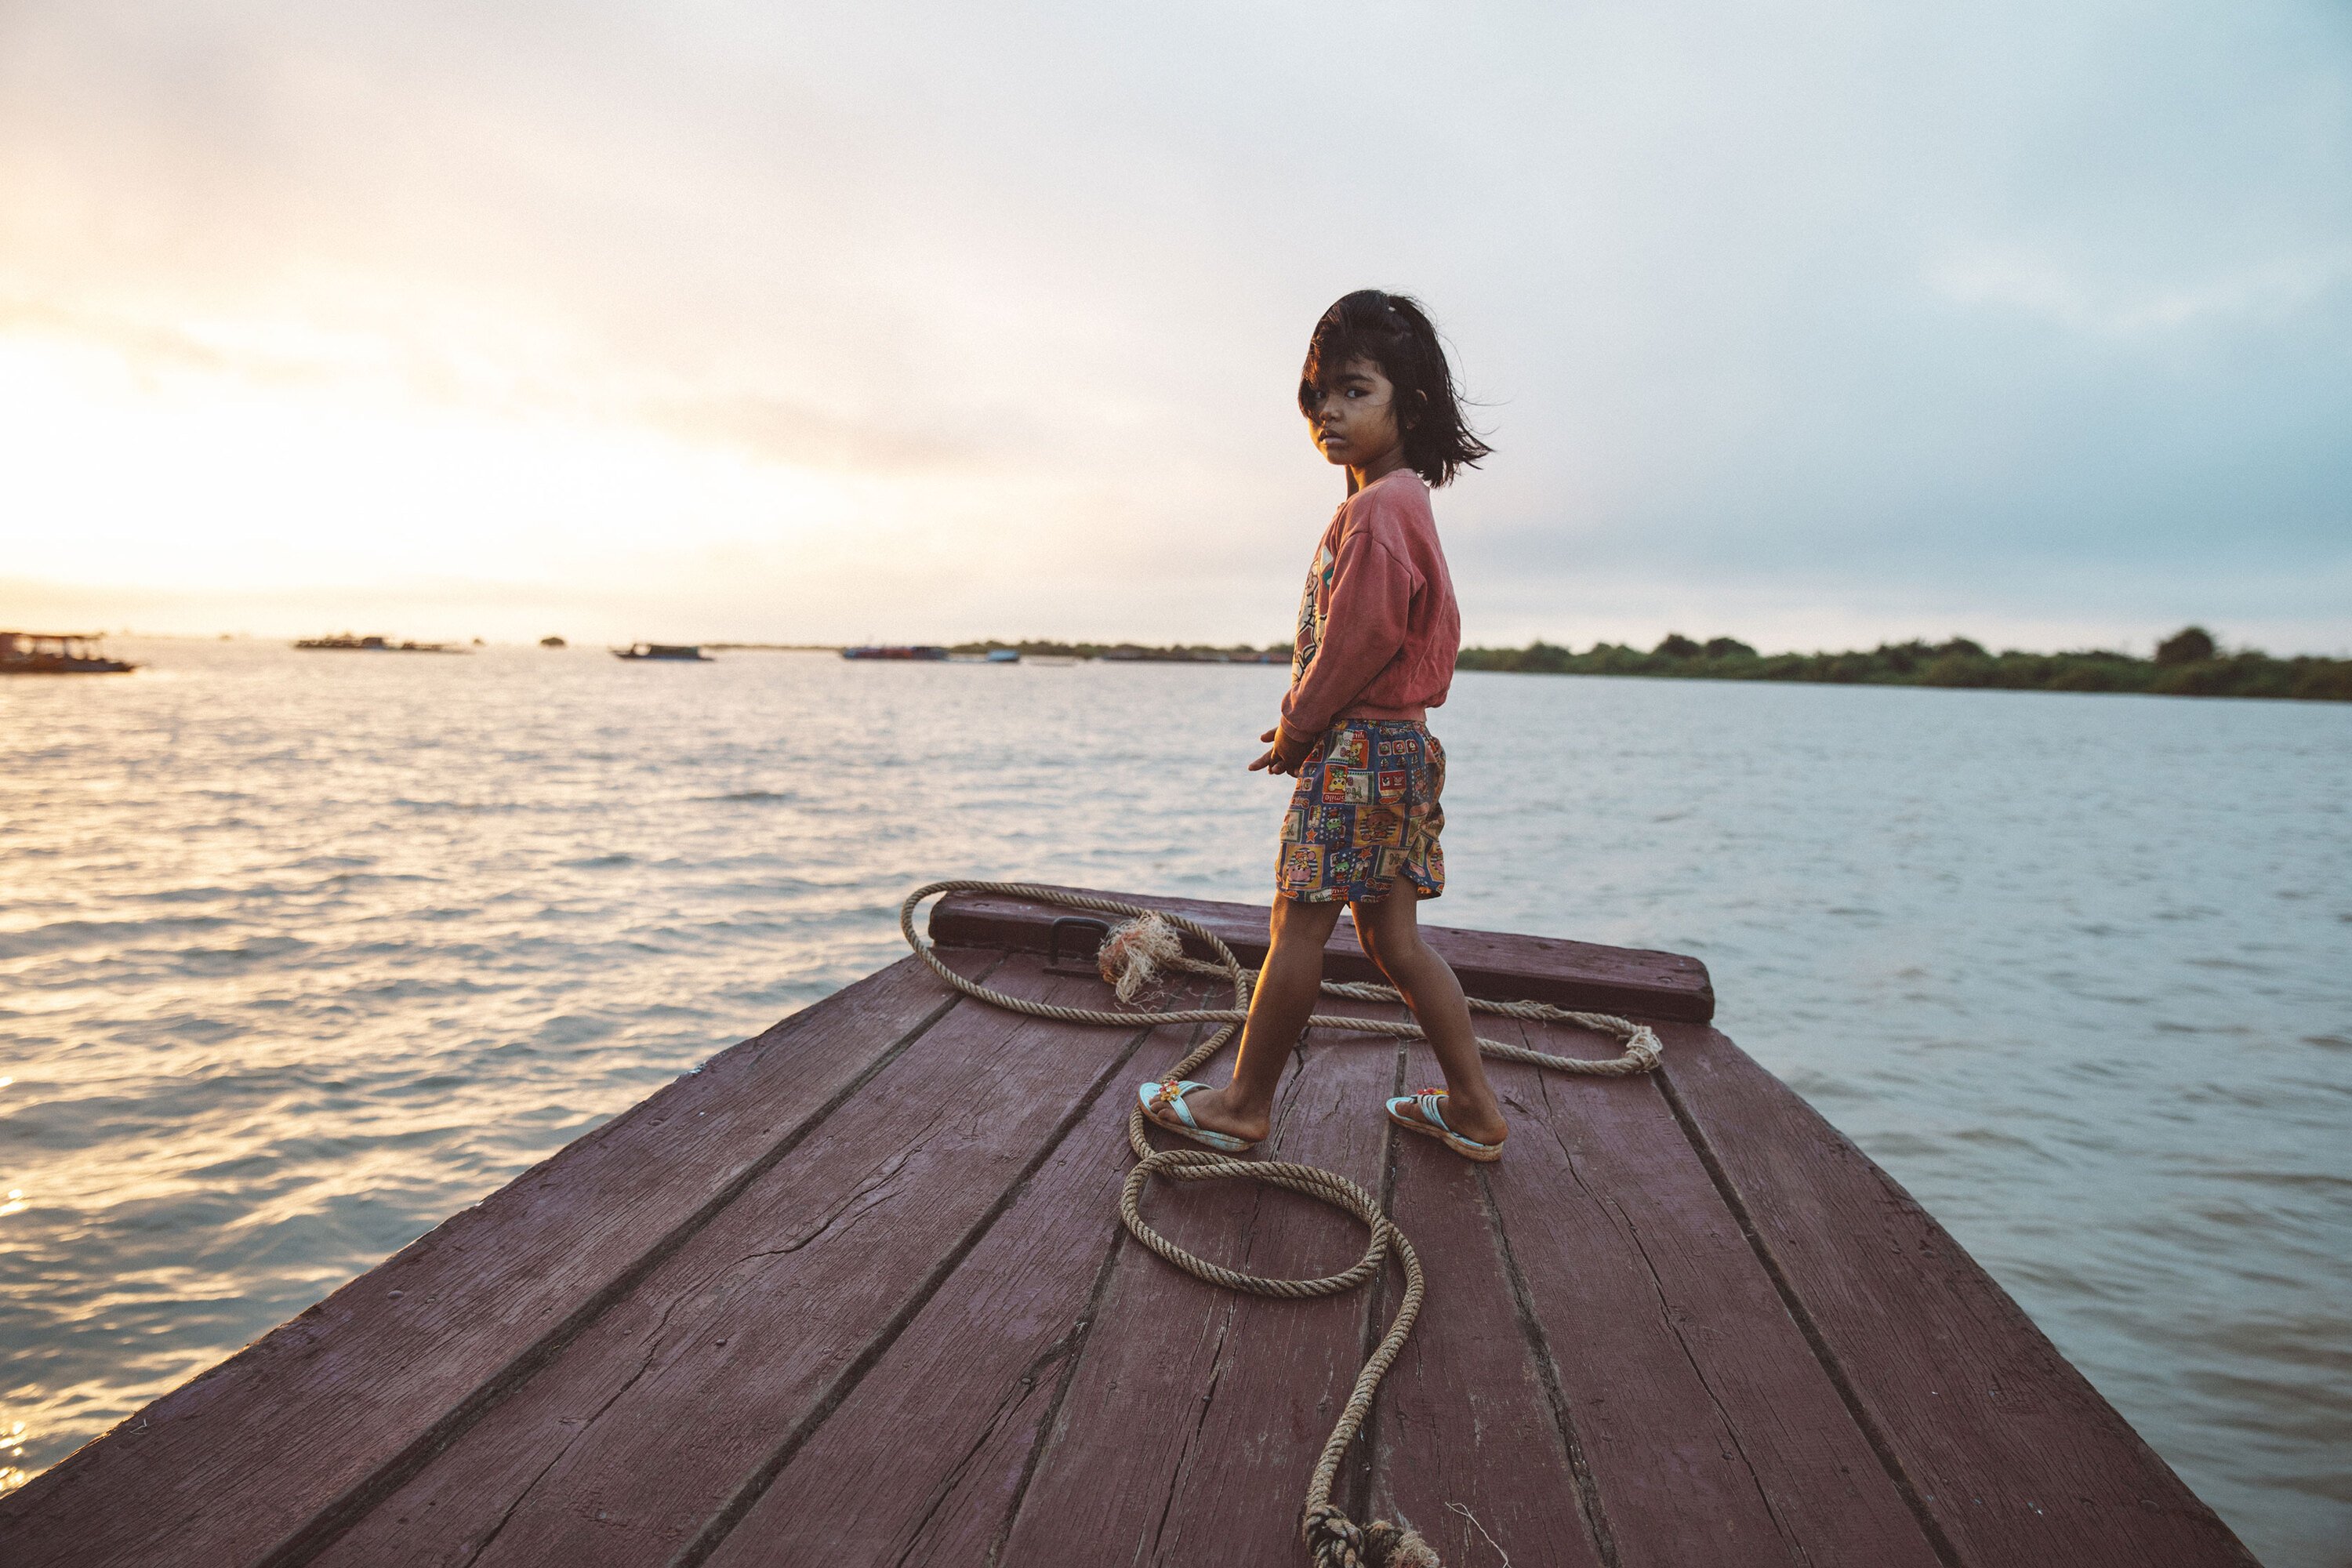 Child stood on boat on the Tonle Sap Lake in Cambodia